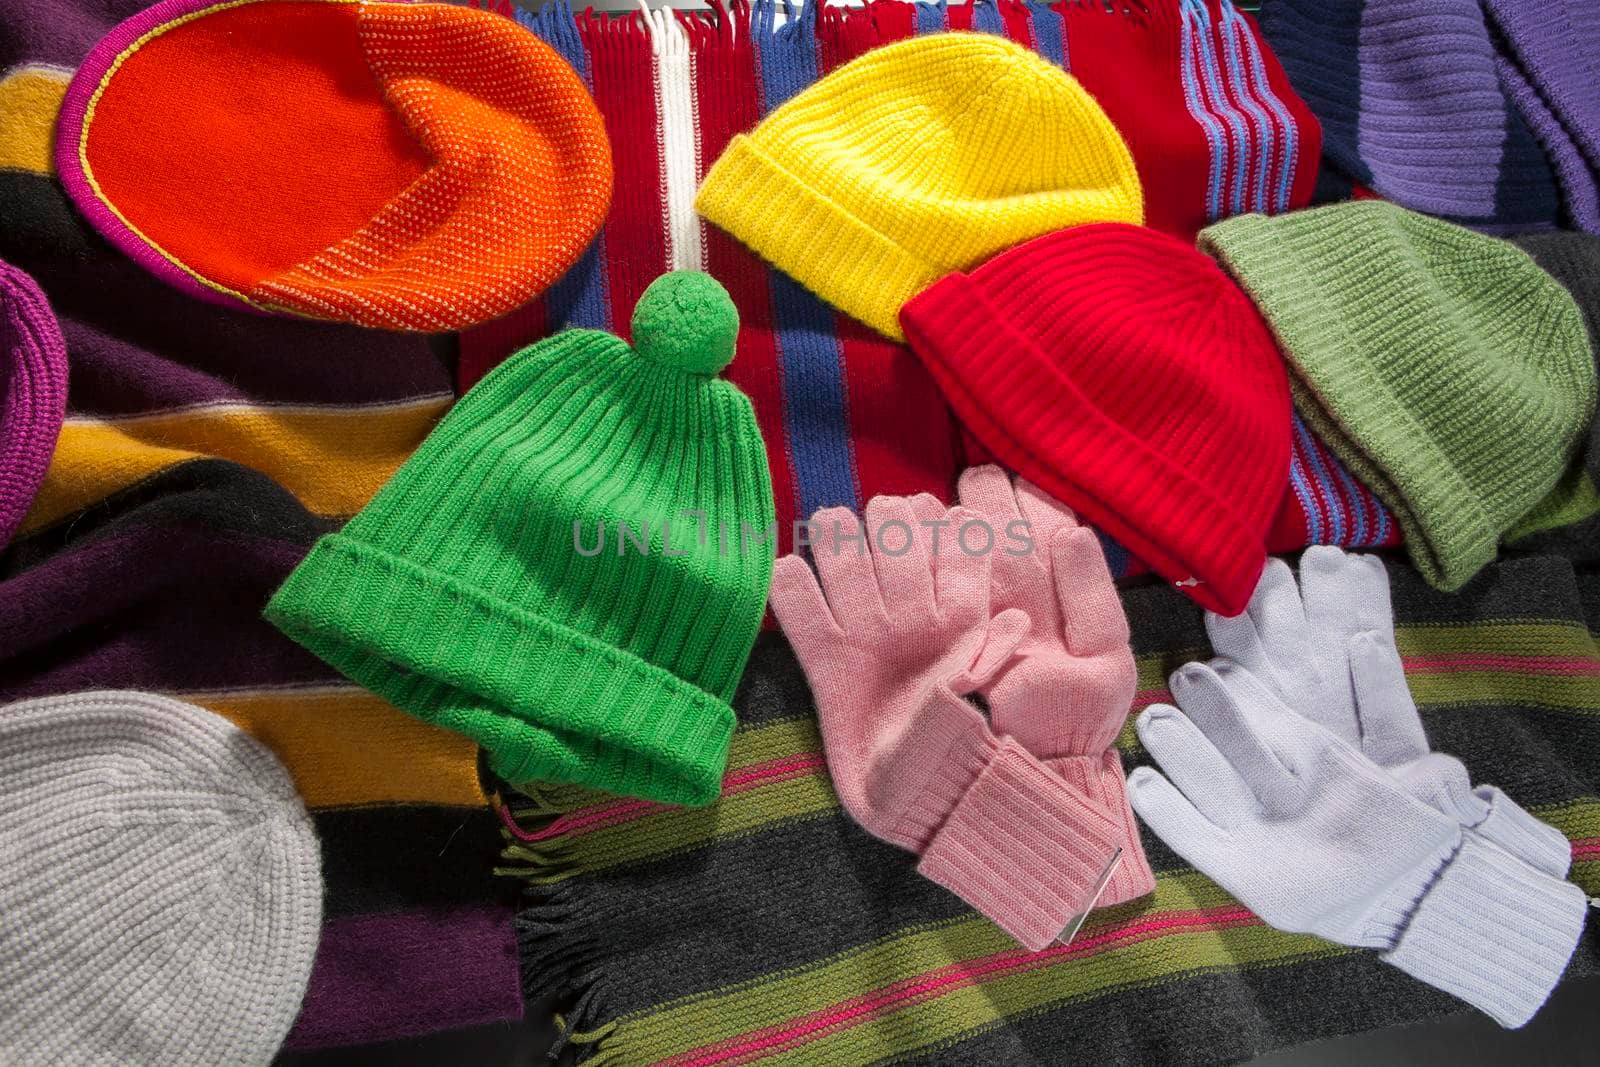 Multicolored knitted and crocheted hats, scarves, gloves are laid out on the counter as decoration by elenarostunova